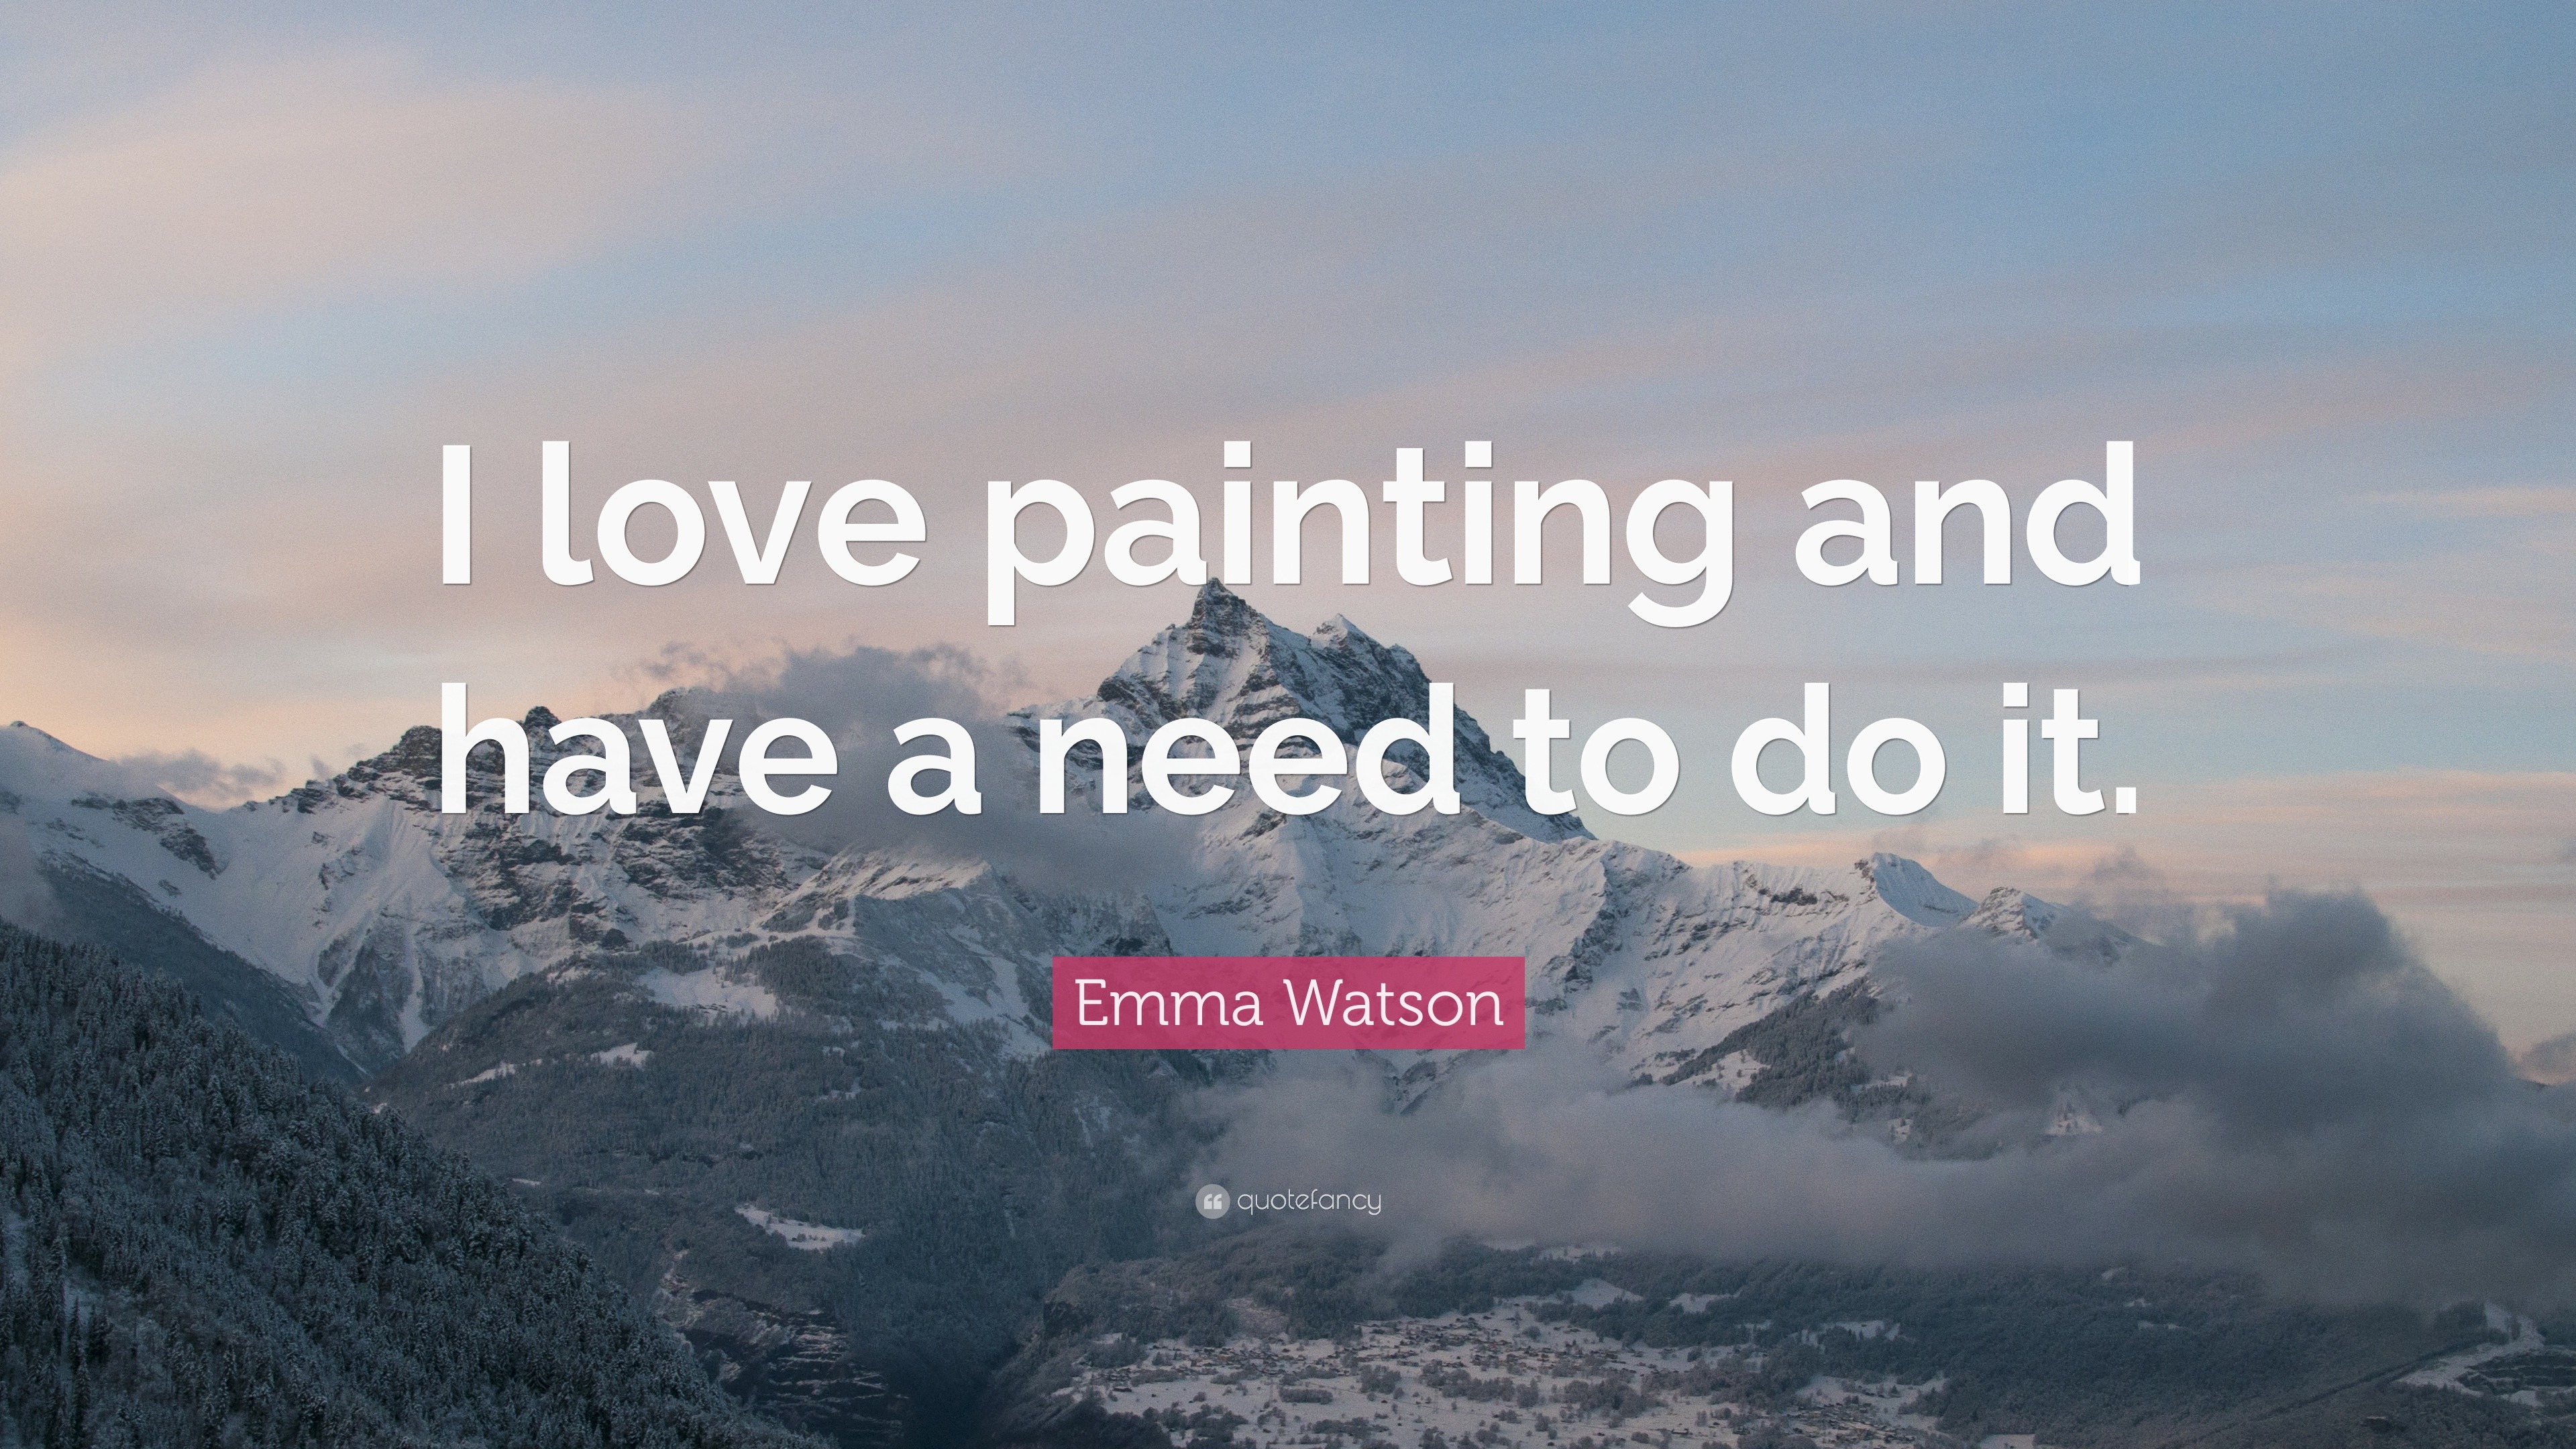 emma watson quotes of love